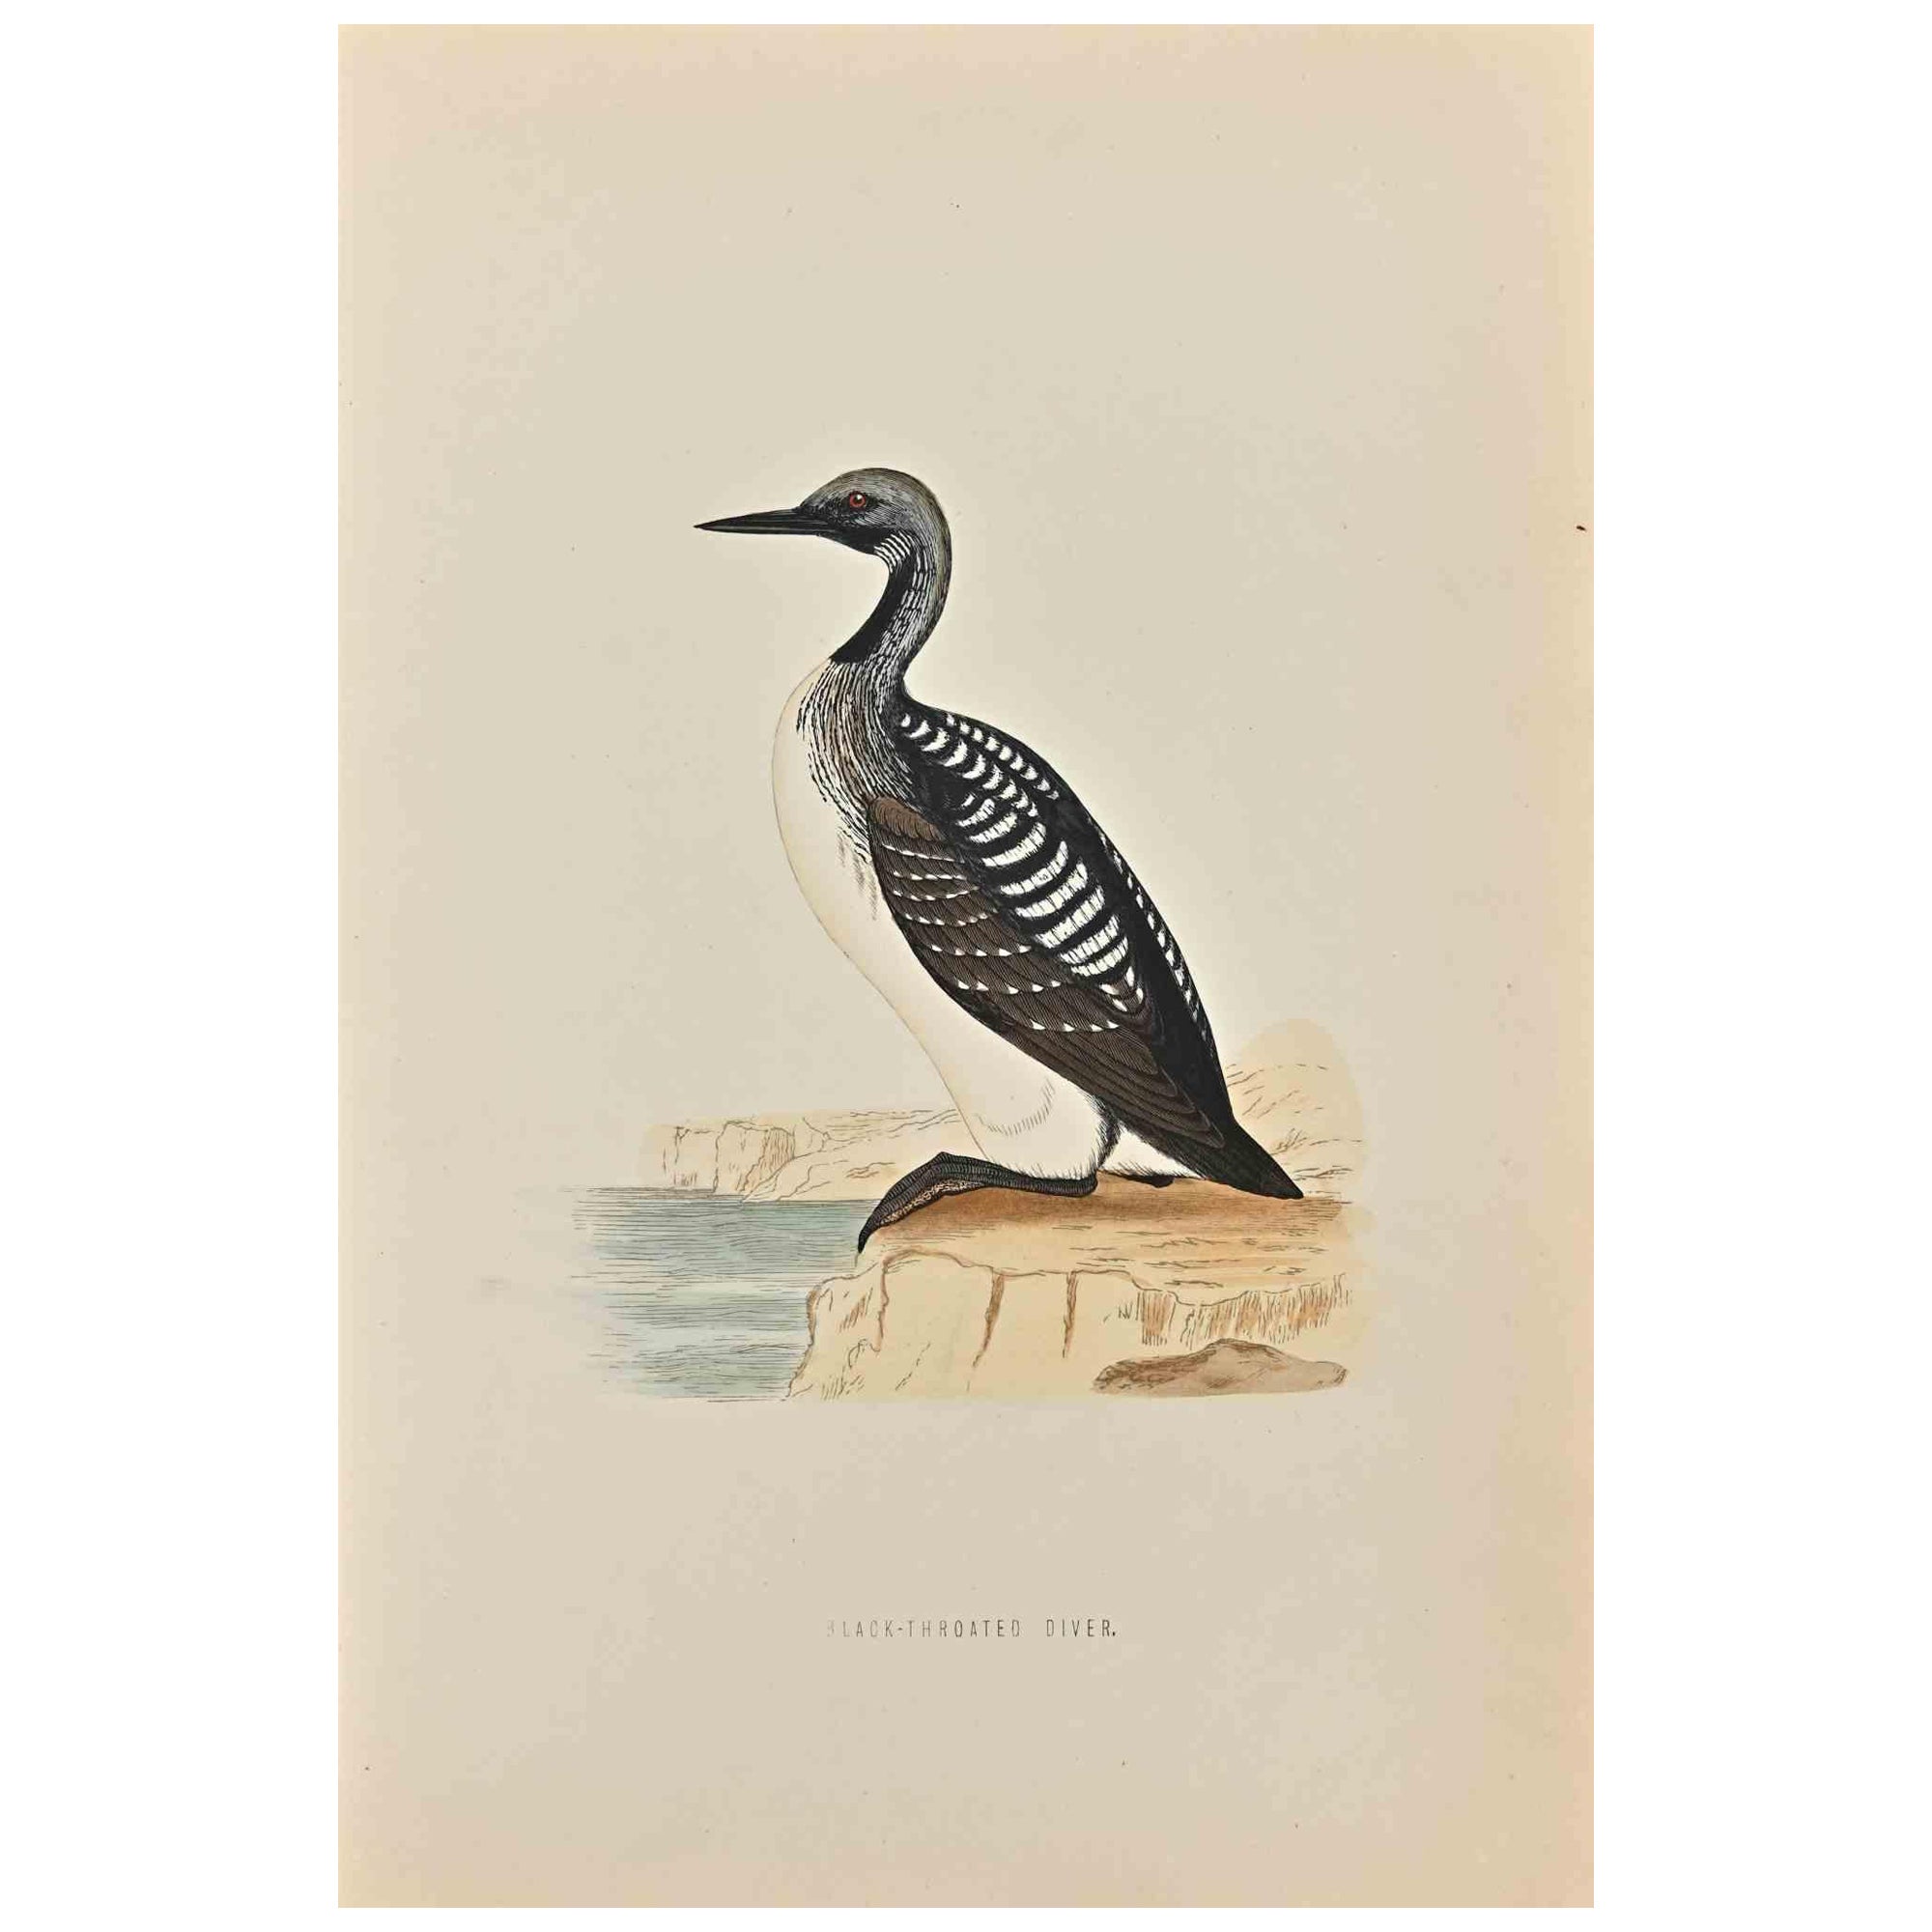 Slack-Throated Diver is a modern artwork realized in 1870 by the British artist Alexander Francis Lydon (1836-1917).

Woodcut print on ivory-colored paper.

Hand-colored, published by London, Bell & Sons, 1870.  

The name of the bird is printed on